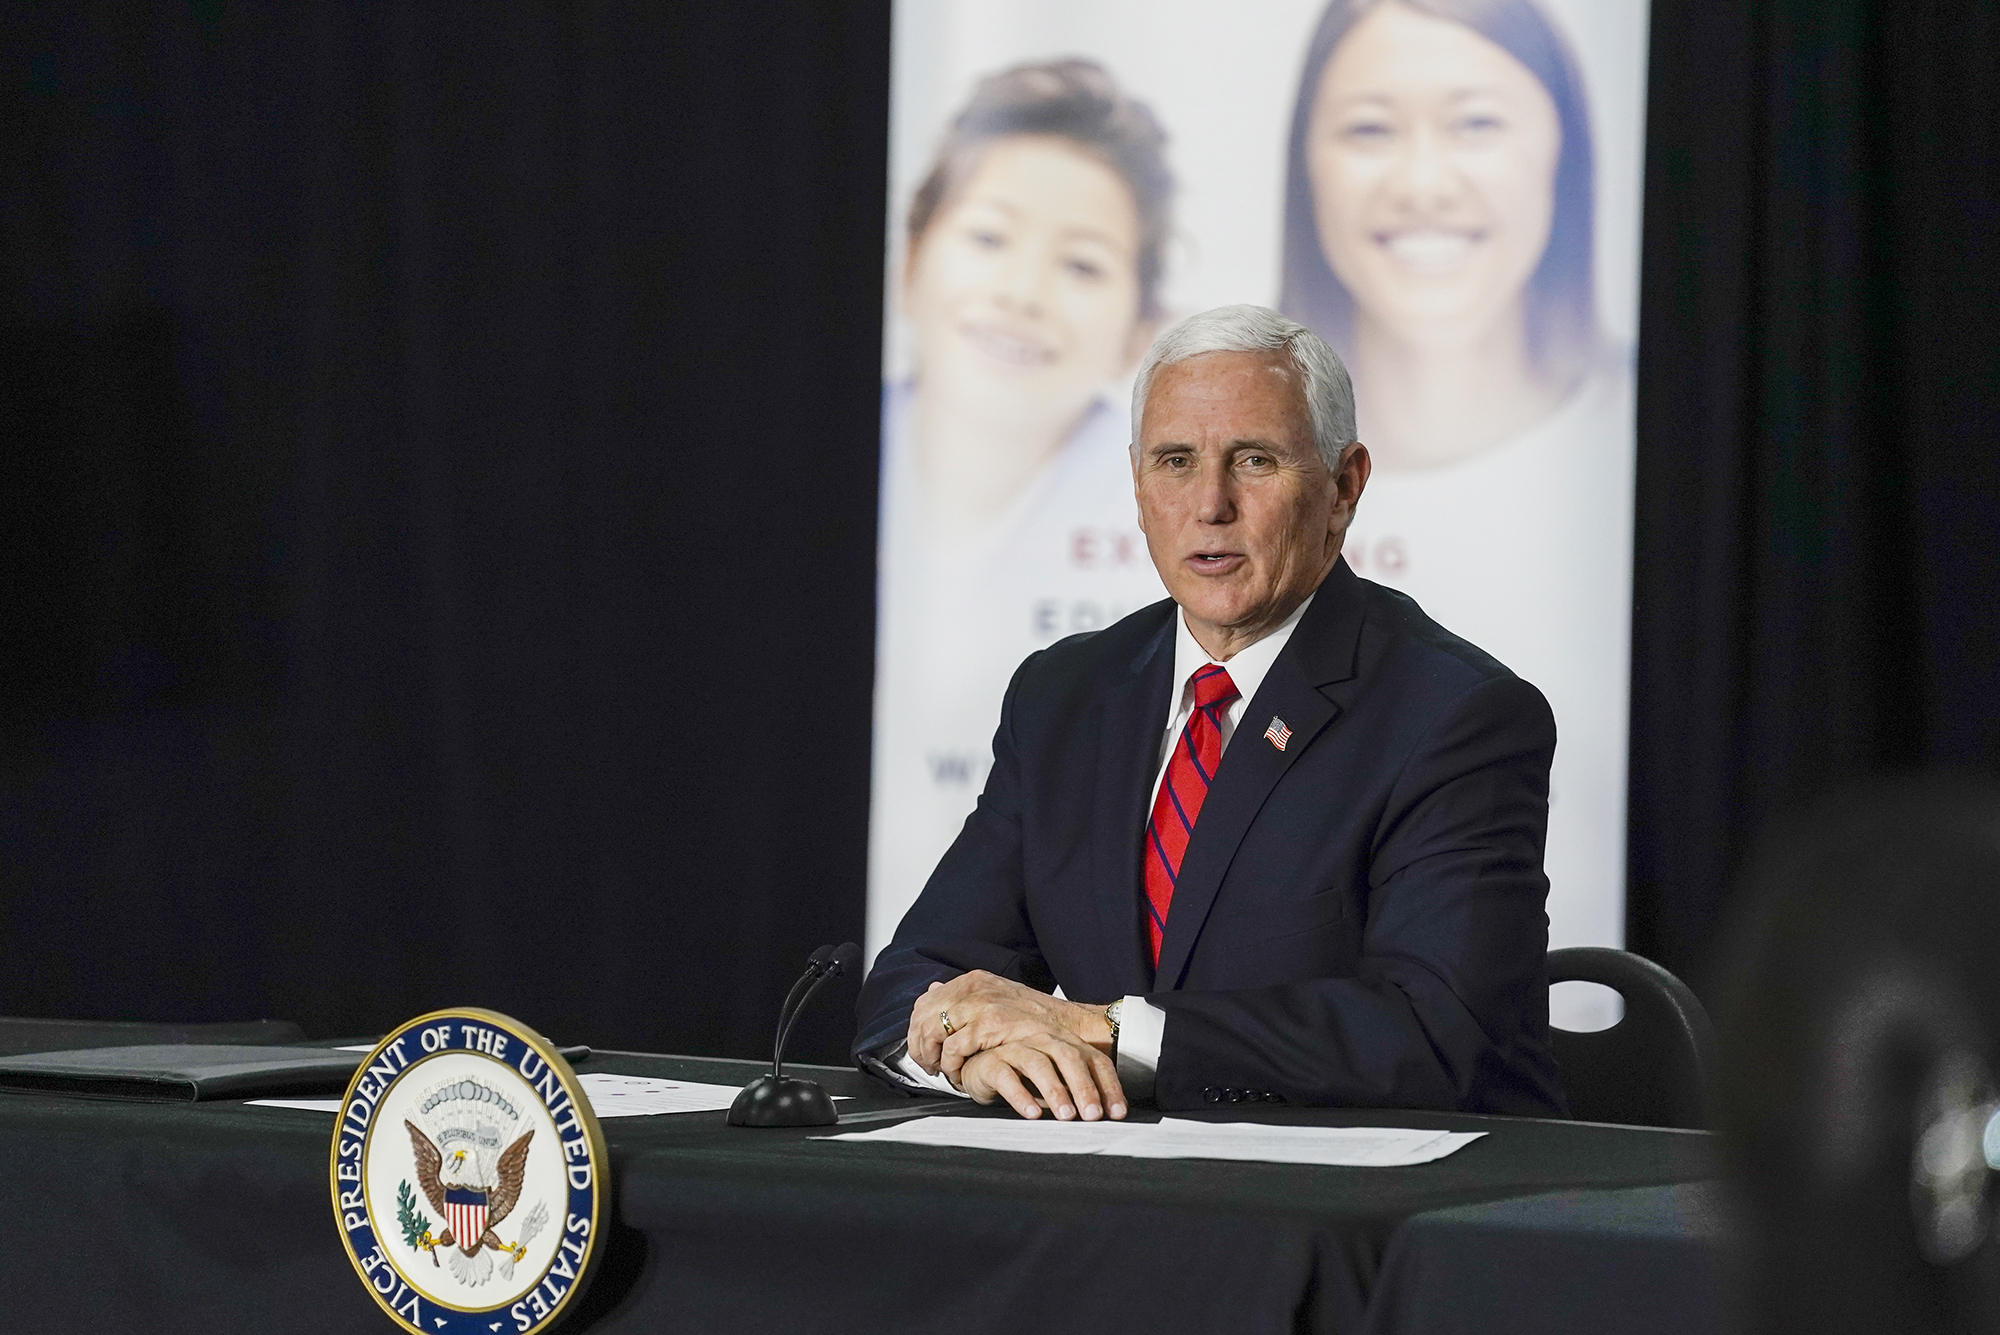 Vice President Mike Pence participates in a roundtable event at Waukesha STEM Academy